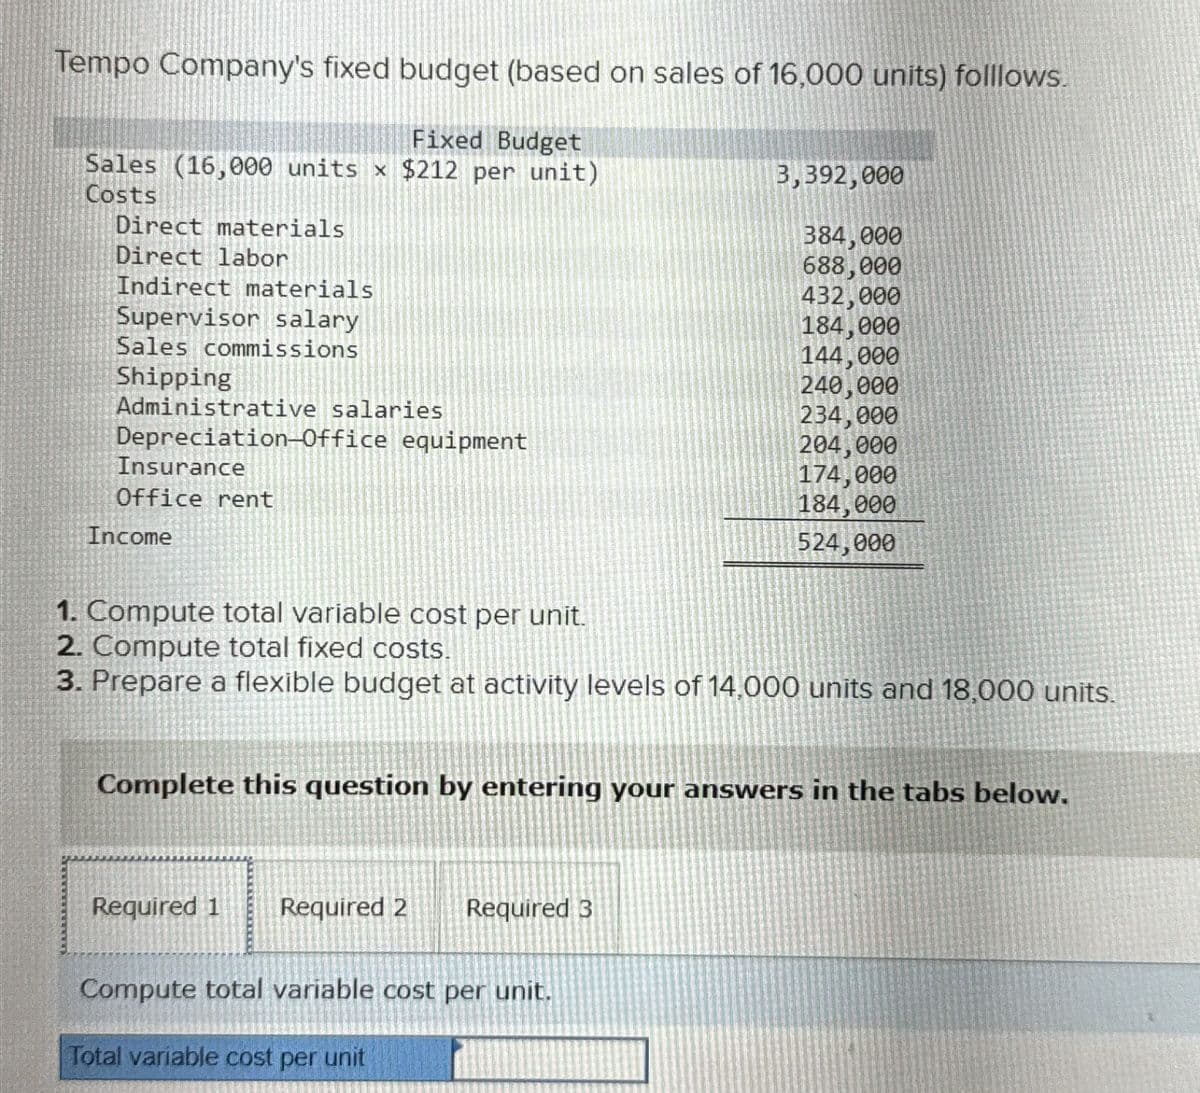 Tempo Company's fixed budget (based on sales of 16,000 units) folllows.
Fixed Budget
Sales (16,000 units x $212 per unit)
Costs
Direct materials
Direct labor
Indirect materials
3,392,000
384,000
688,000
432,000
Supervisor salary
Sales commissions
Shipping
184,000
144,000
240,000
Administrative salaries
234,000
Depreciation-Office equipment
204,000
Insurance
174,000
Office rent
184,000
Income
524,000
1. Compute total variable cost per unit.
2. Compute total fixed costs.
3. Prepare a flexible budget at activity levels of 14,000 units and 18,000 units.
Complete this question by entering your answers in the tabs below.
Required 1
Required 2 Required 3
Compute total variable cost per unit.
Total variable cost per unit